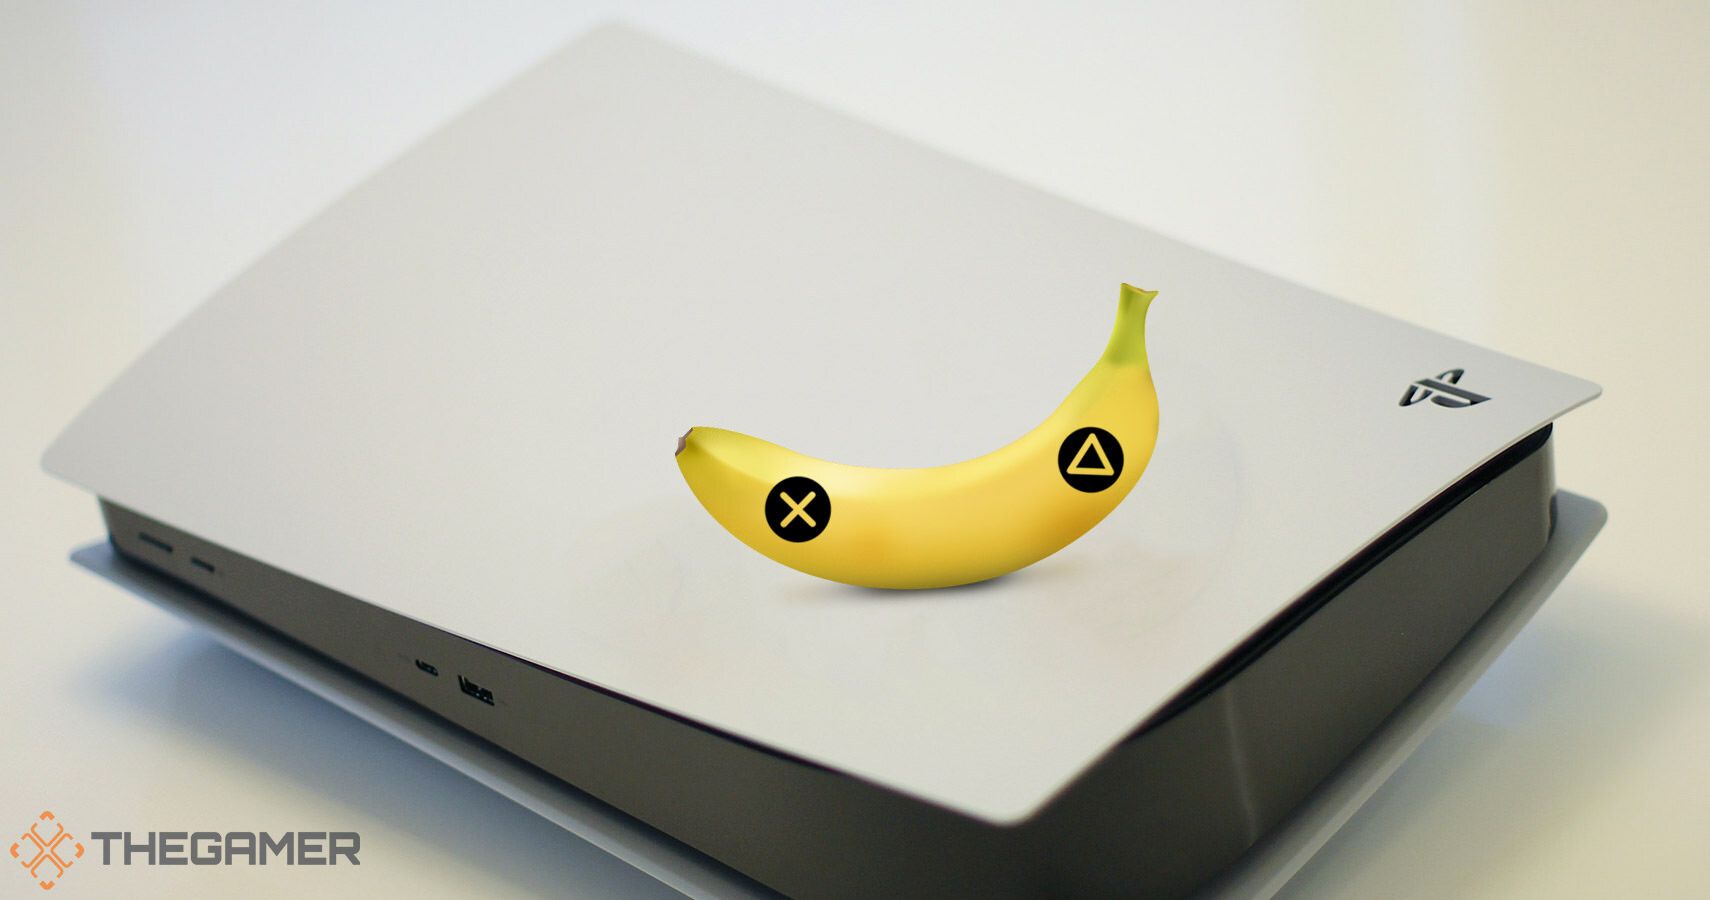 PlayStation could let players use bananas as 'cheap game controllers